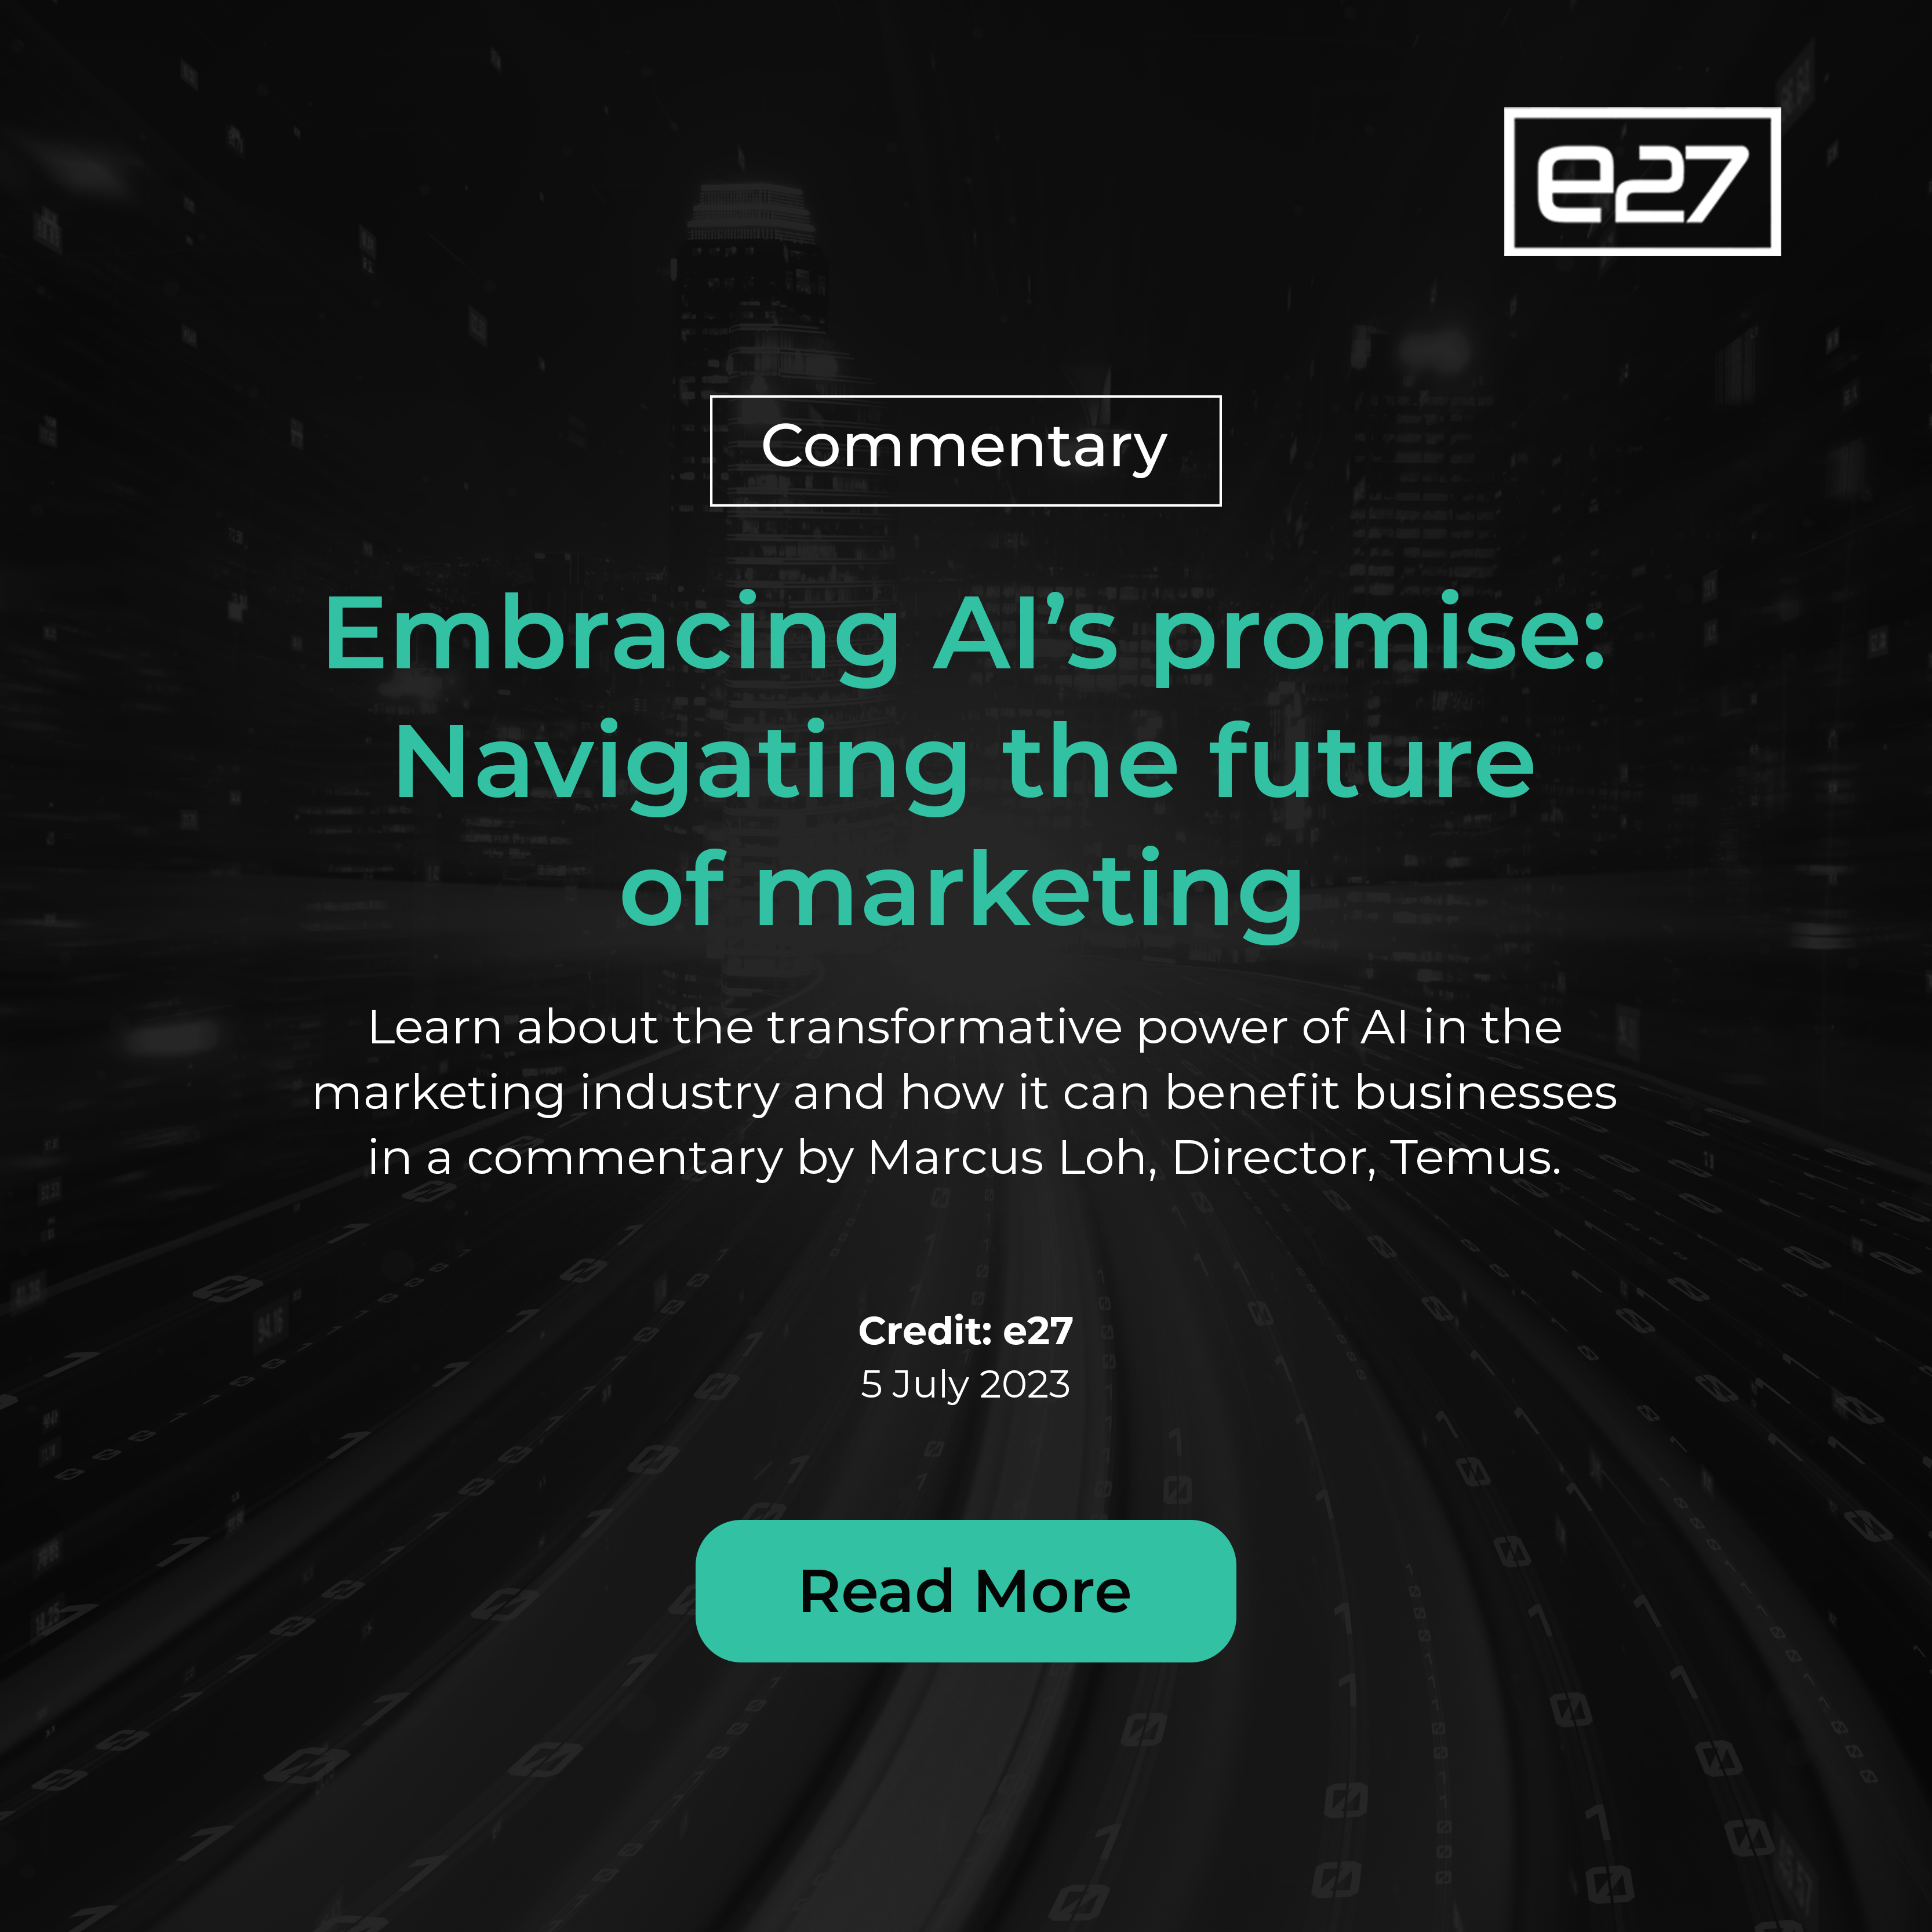 Embracing AI’s promise: Navigating the future of marketing